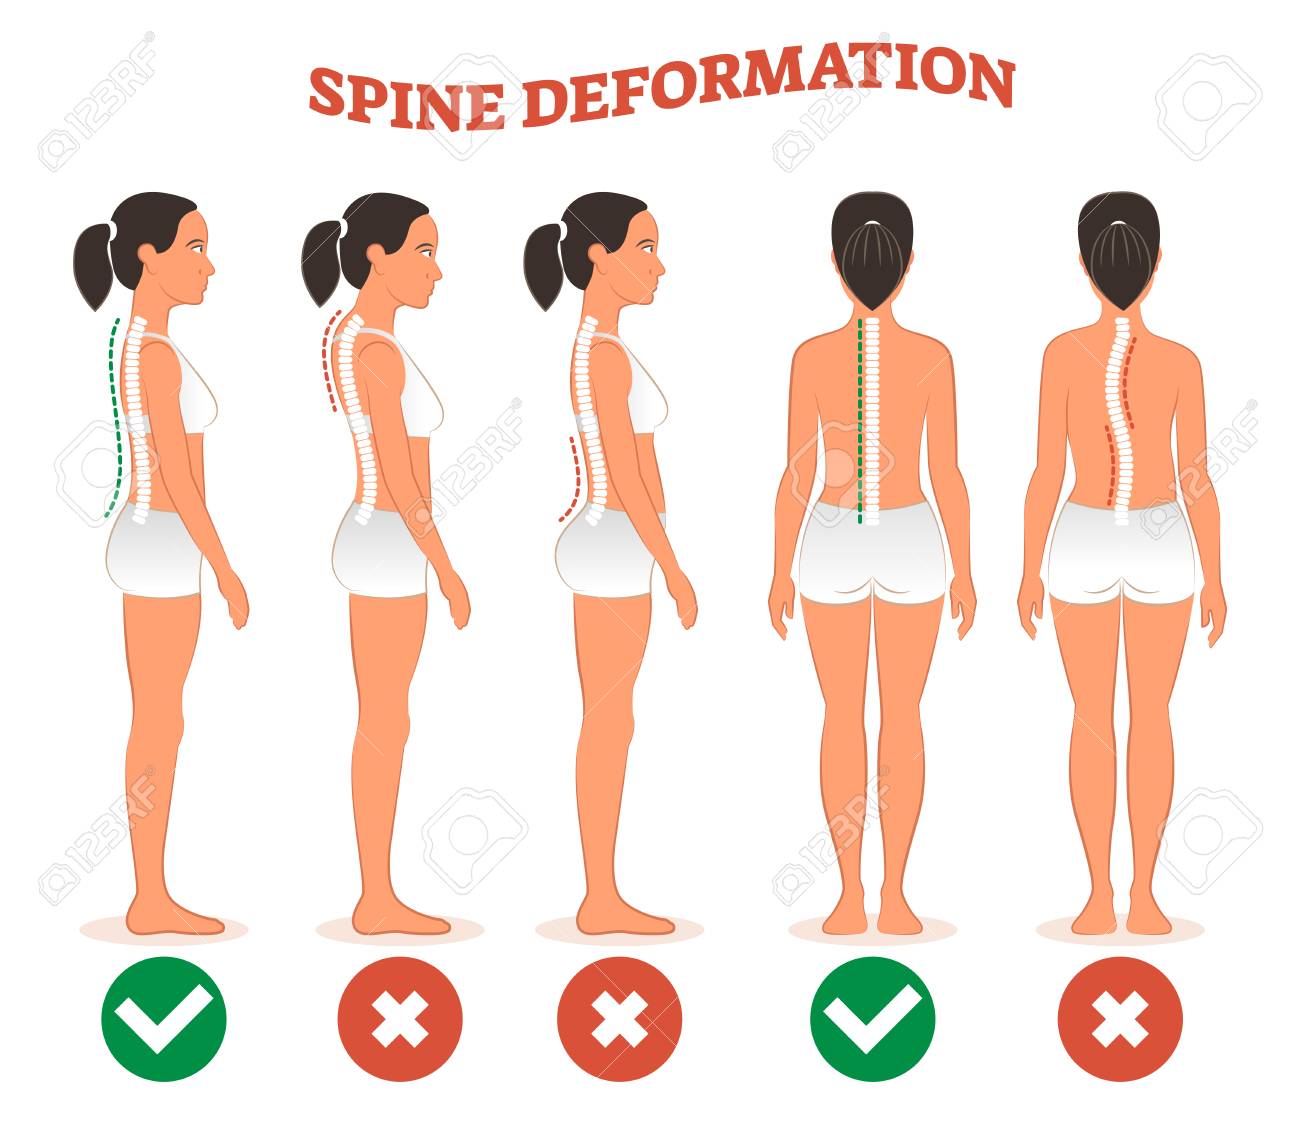 99334702-spine-deformation-types-and-healthy-spine-comparison-diagram-poster-with-back-bone-curvatures-female.jpg